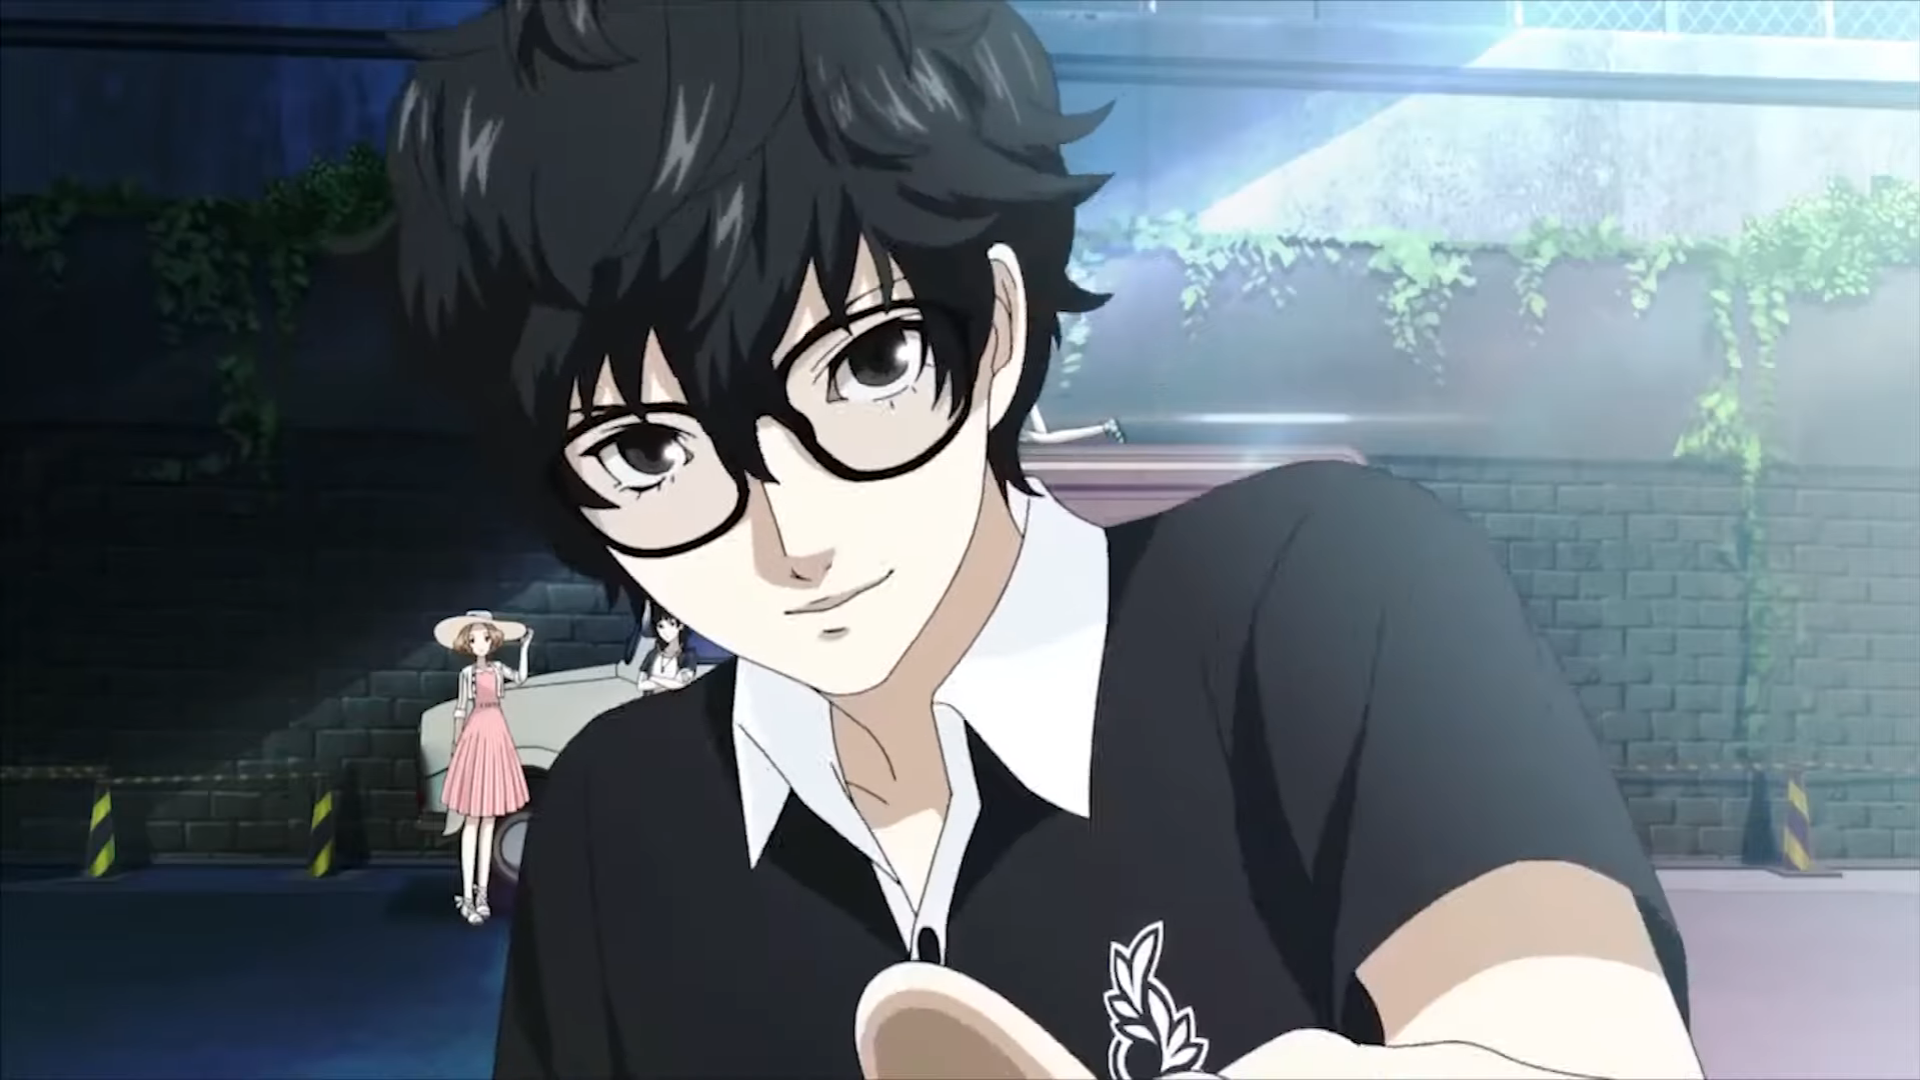 ‘Persona 5 T’ Domain Discovery & Recent Update Suggest Potential New Title Announcement Soon